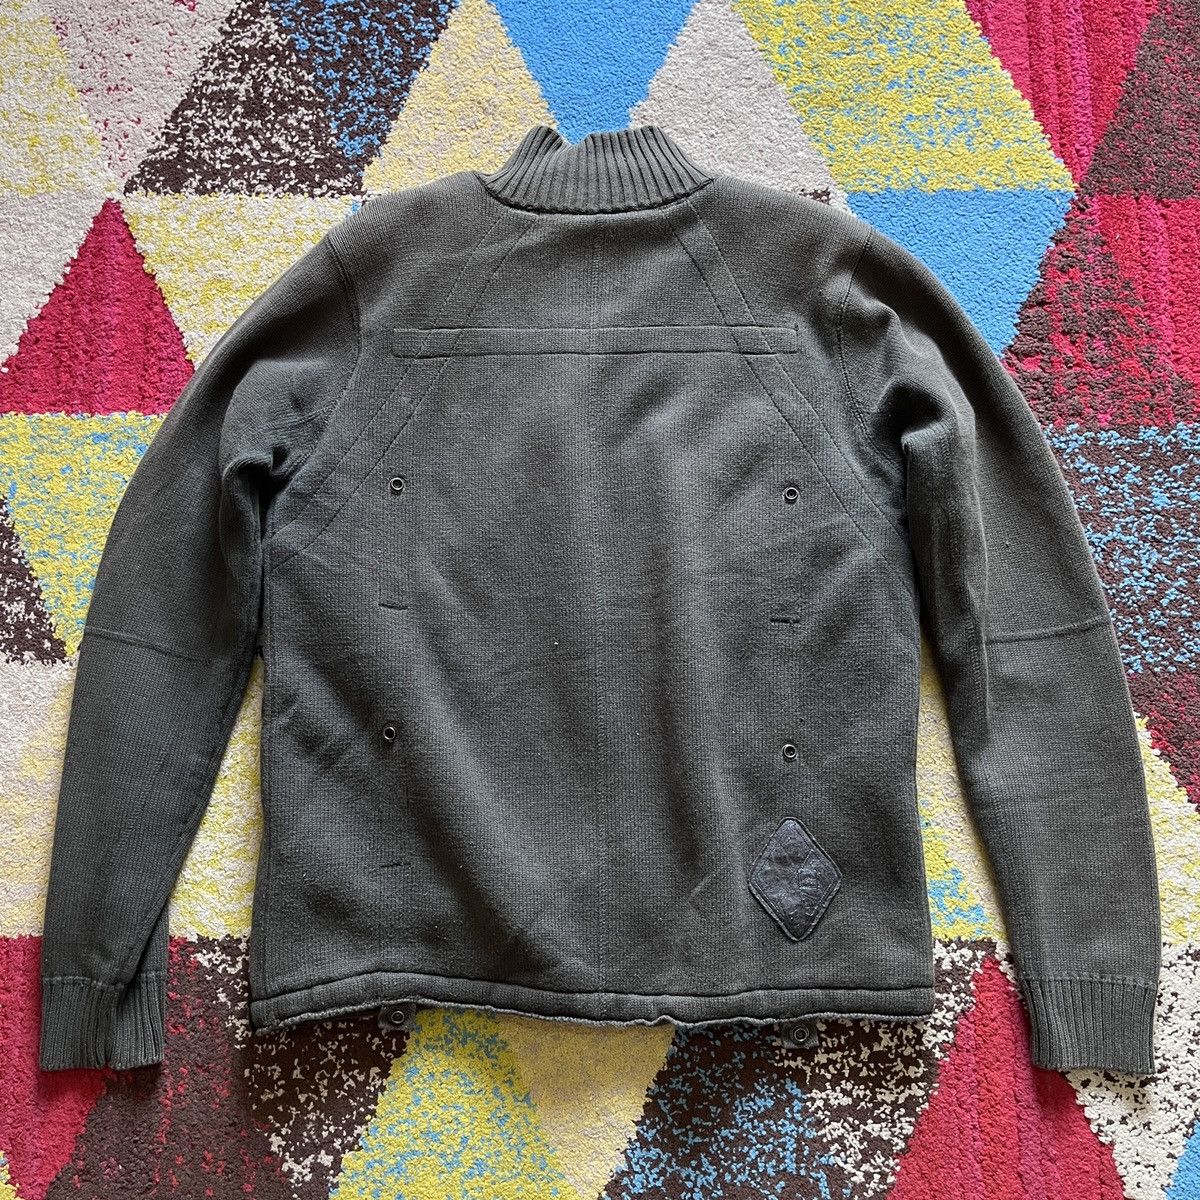 Vintage - Army Sweater G Star Raw Knitwear Wool Tactical Jacket - 15